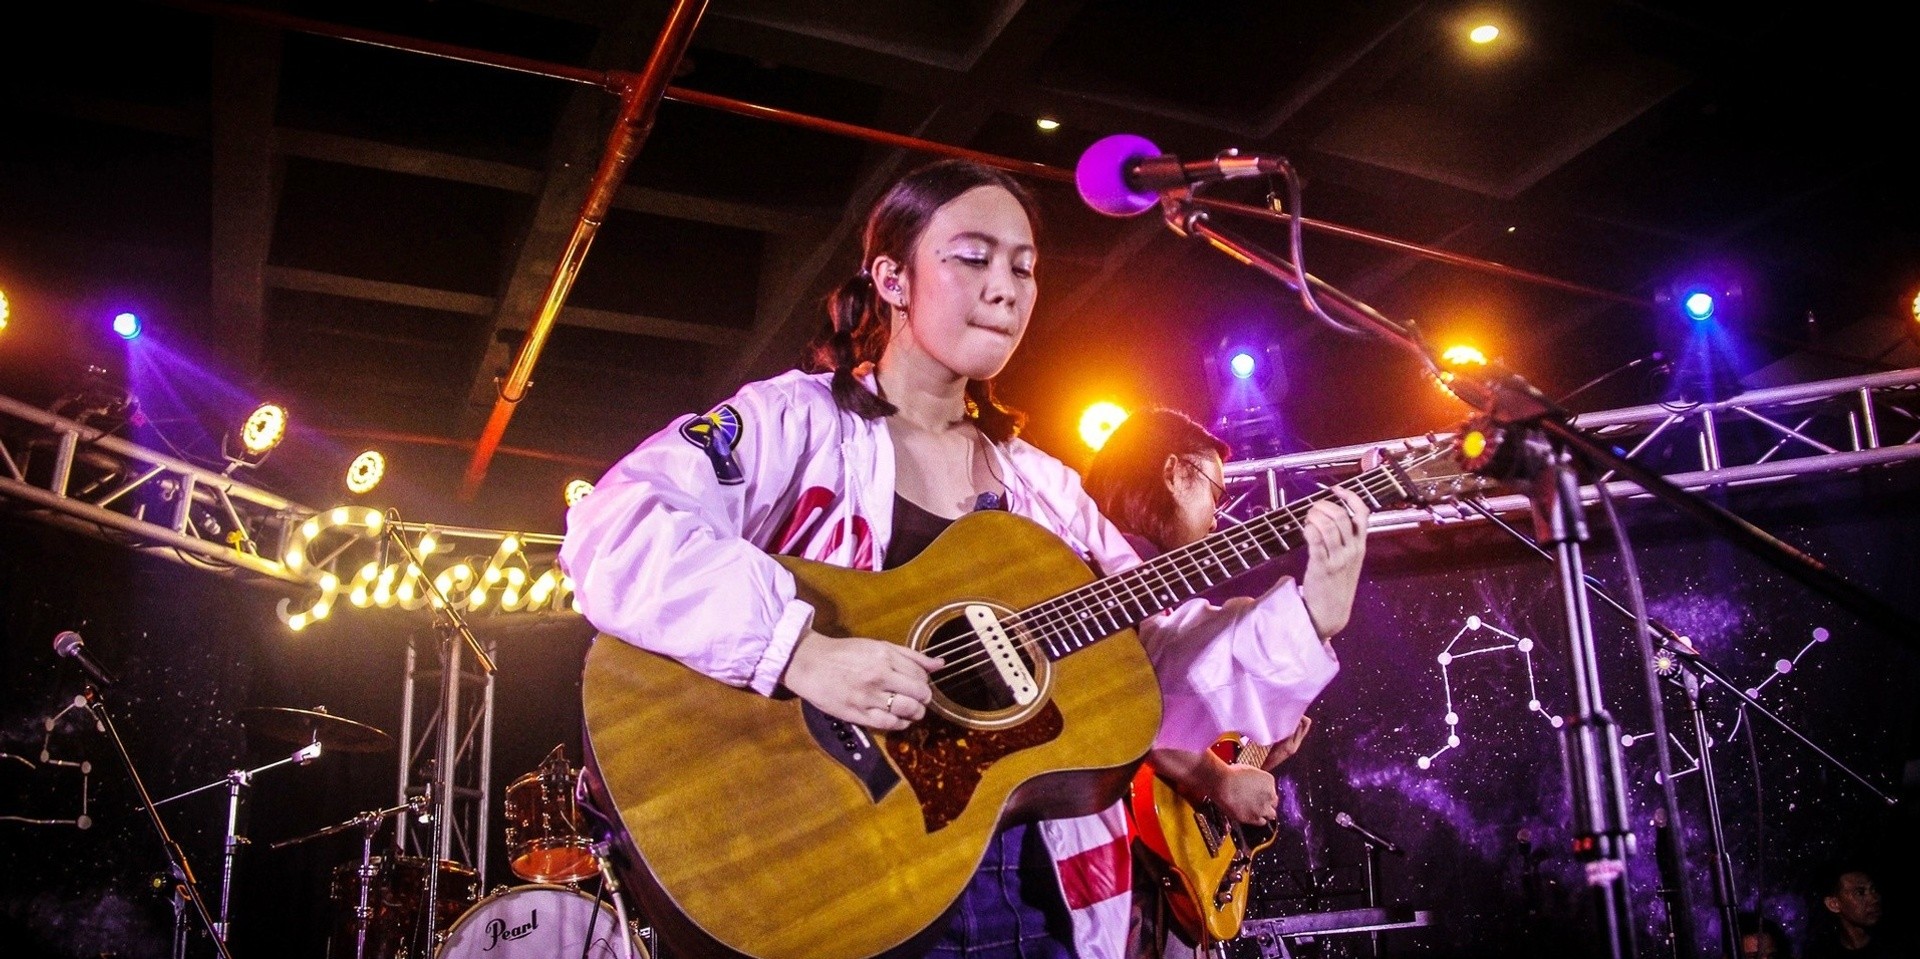 Reese Lansangan is back in the studio for second album, shares behind the scenes snippets